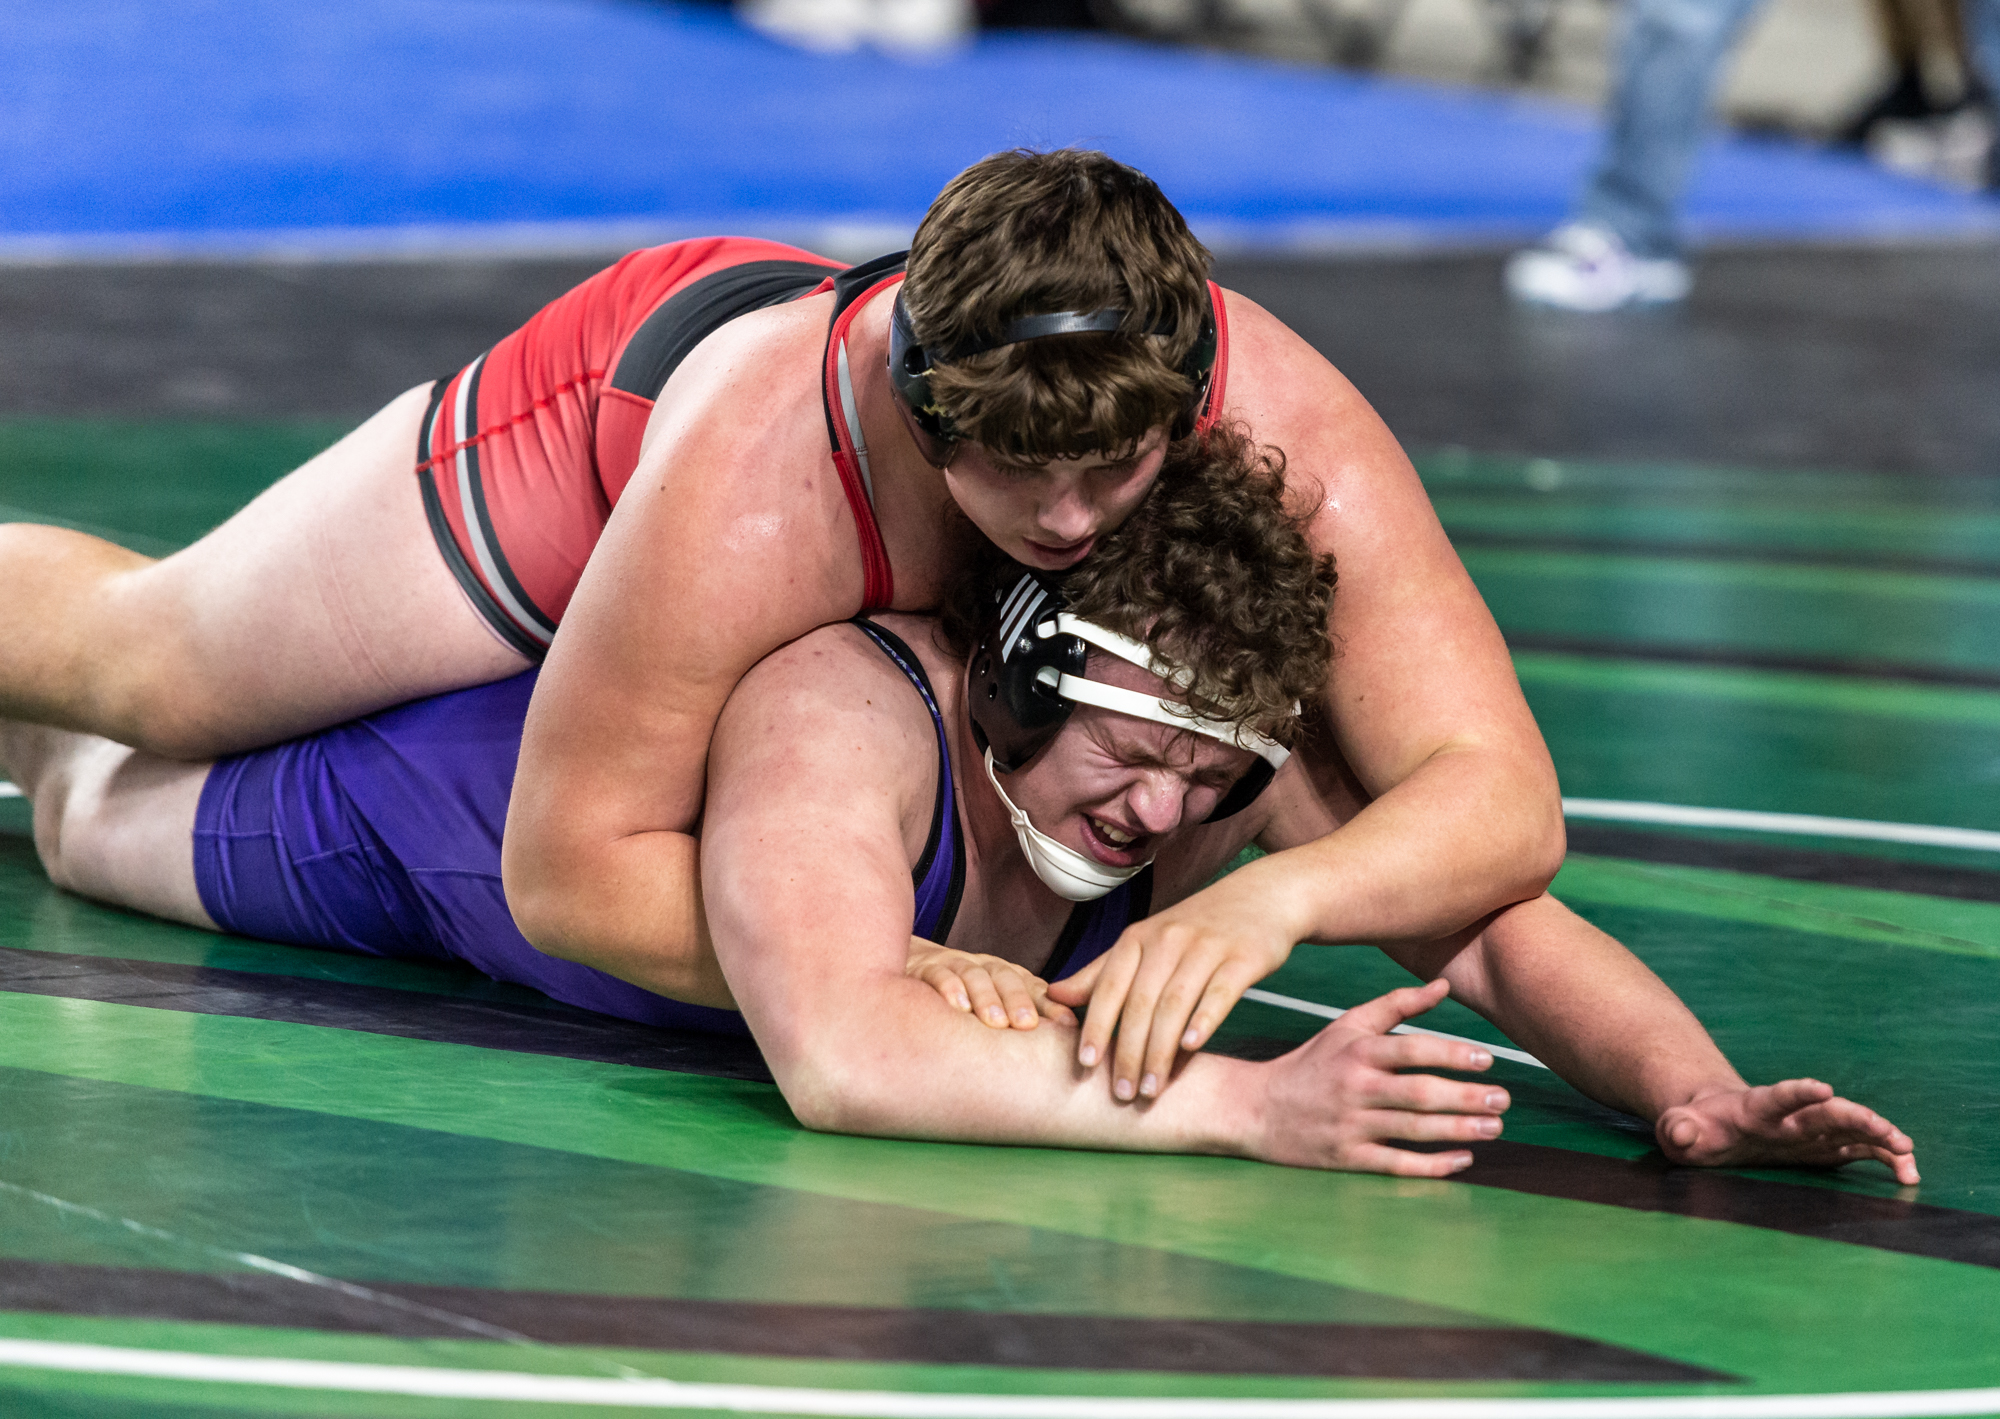 Yelm’s Jonah Smith, 285 pounds, competes against Heritage’s Austin Steinbach in the semifinals at Mat Classic XXXIV on Saturday, February 18, 2023, at the Tacoma Dome.